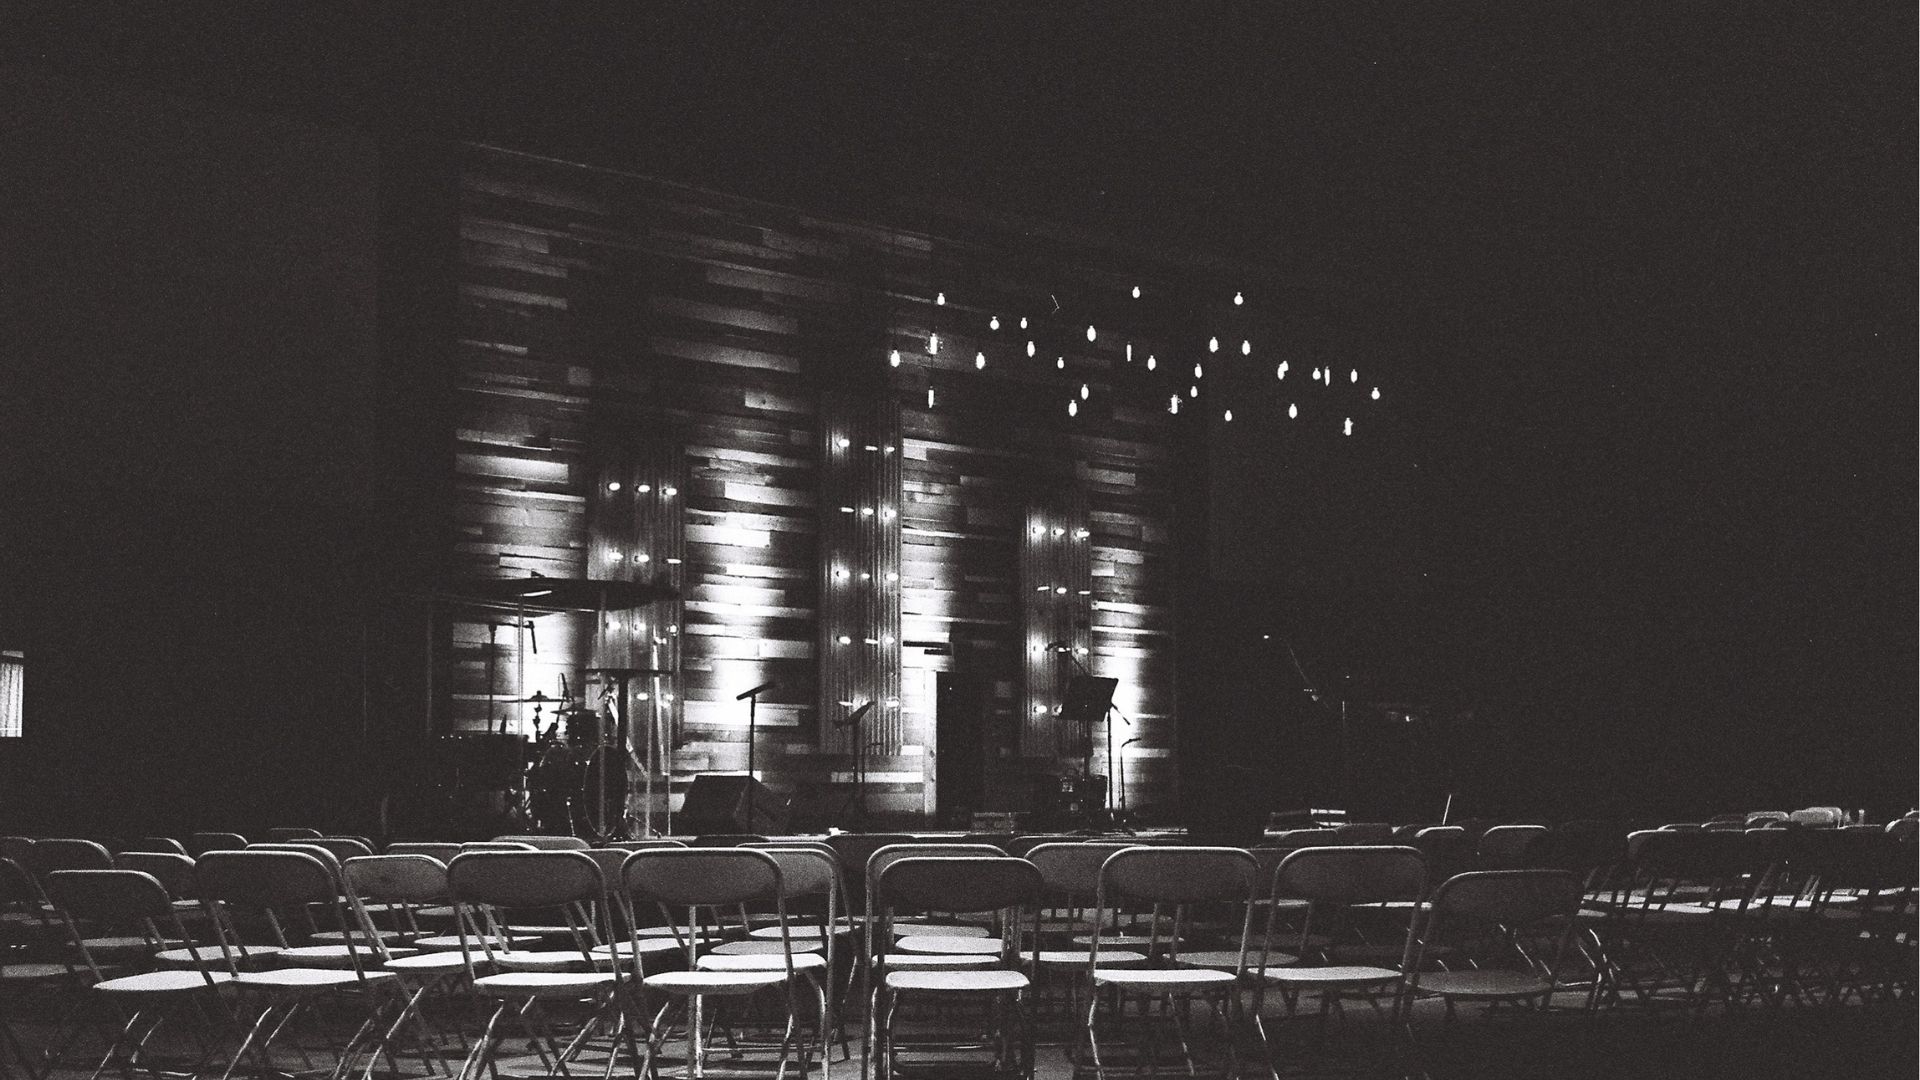 An empty venue with lots of chairs, in black and white